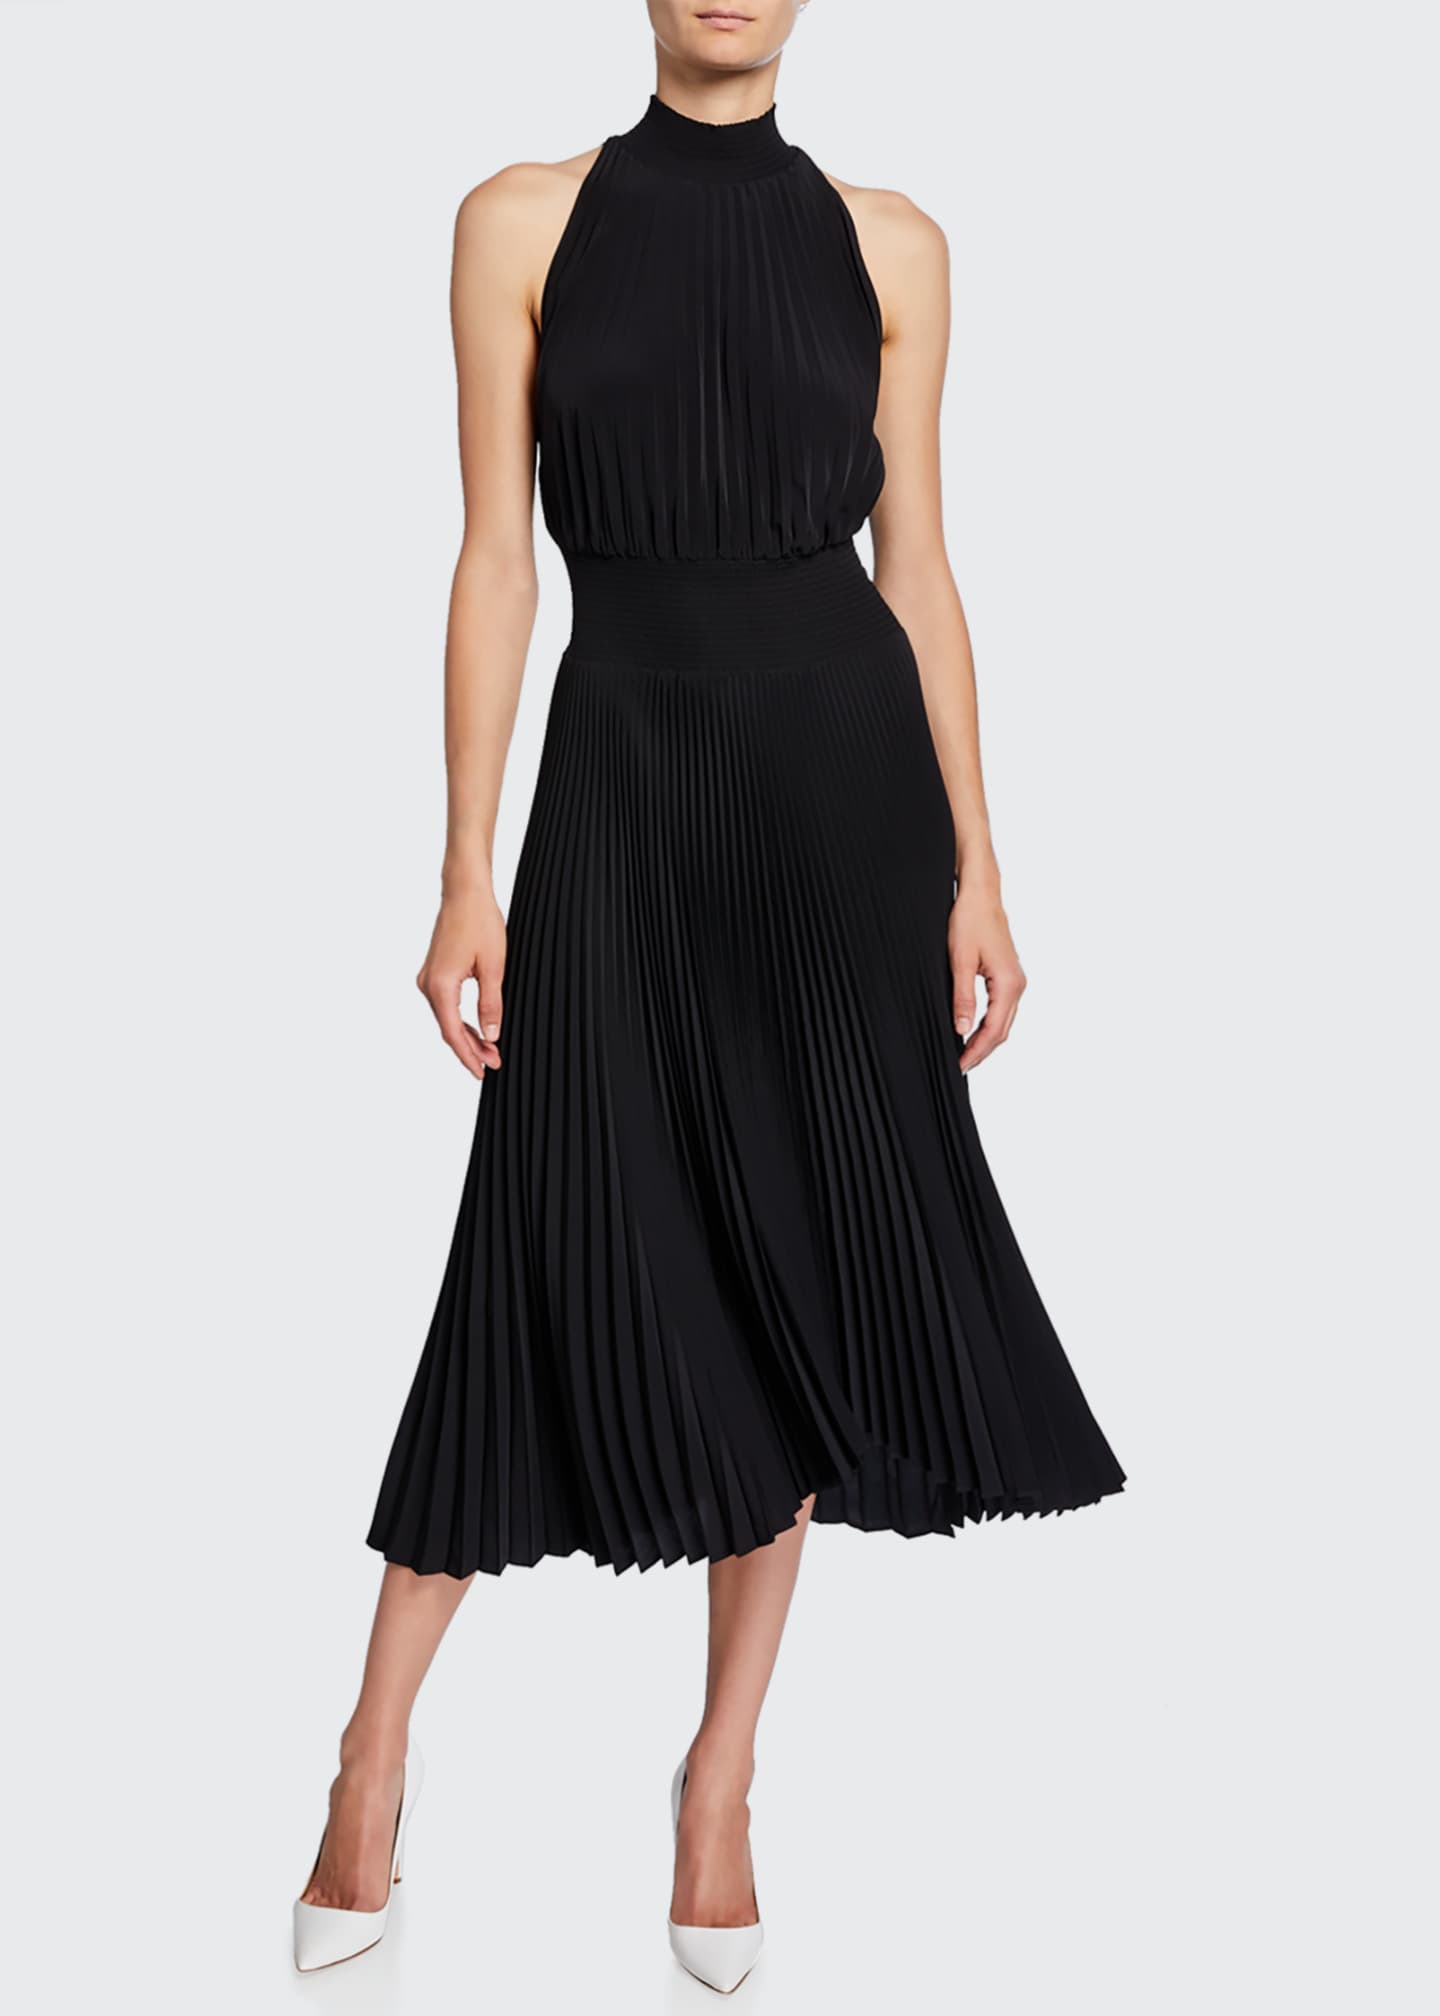 A.L.C. Renzo High-Neck Pleated Asymmetrical Cocktail Dress - Bergdorf ...